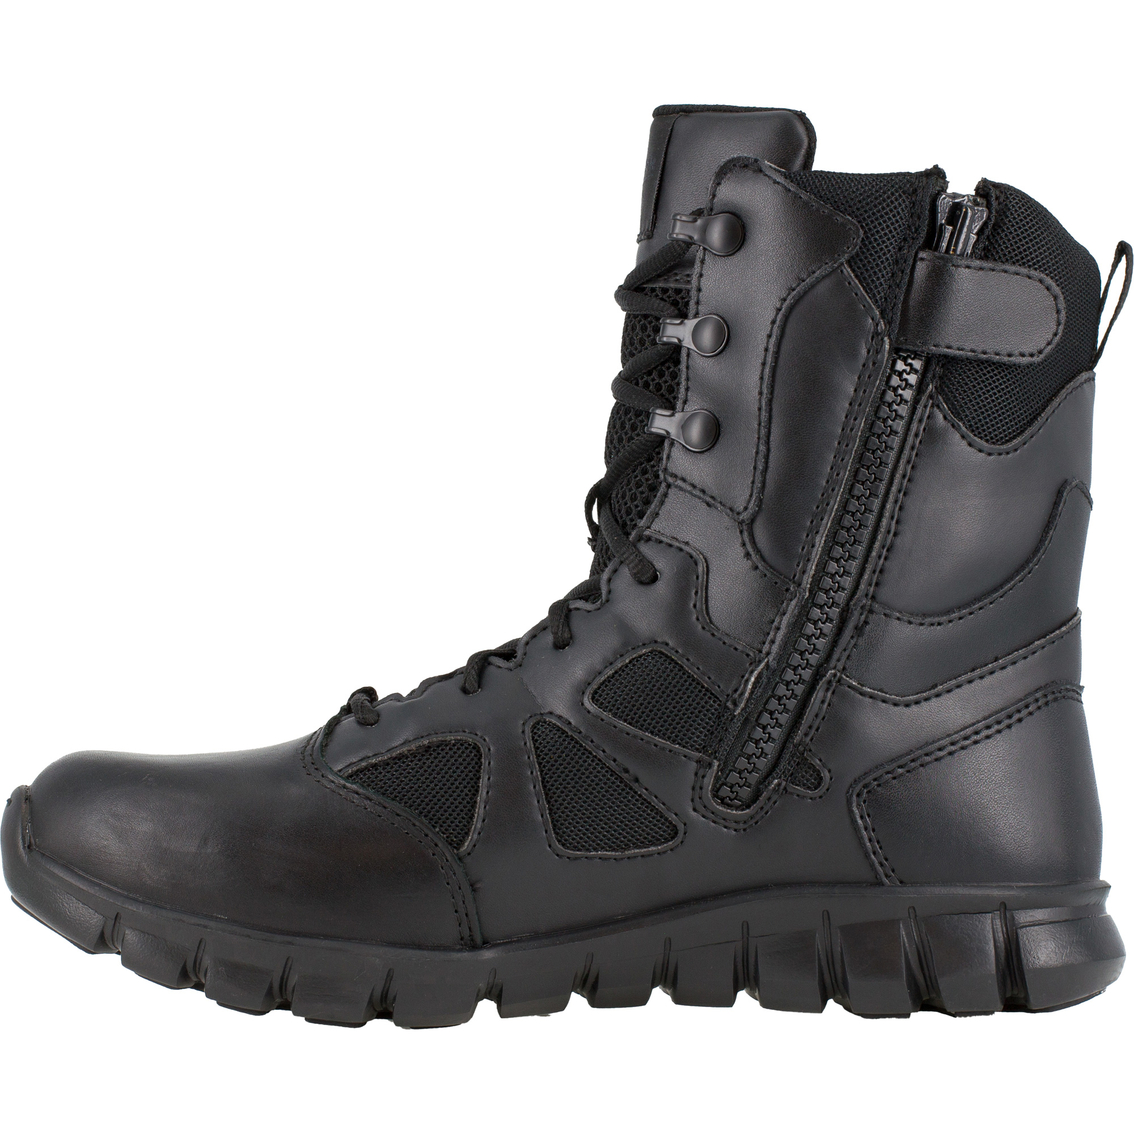 Reebok Sublite Cushion 8 in. Tactical Boots - Image 4 of 5